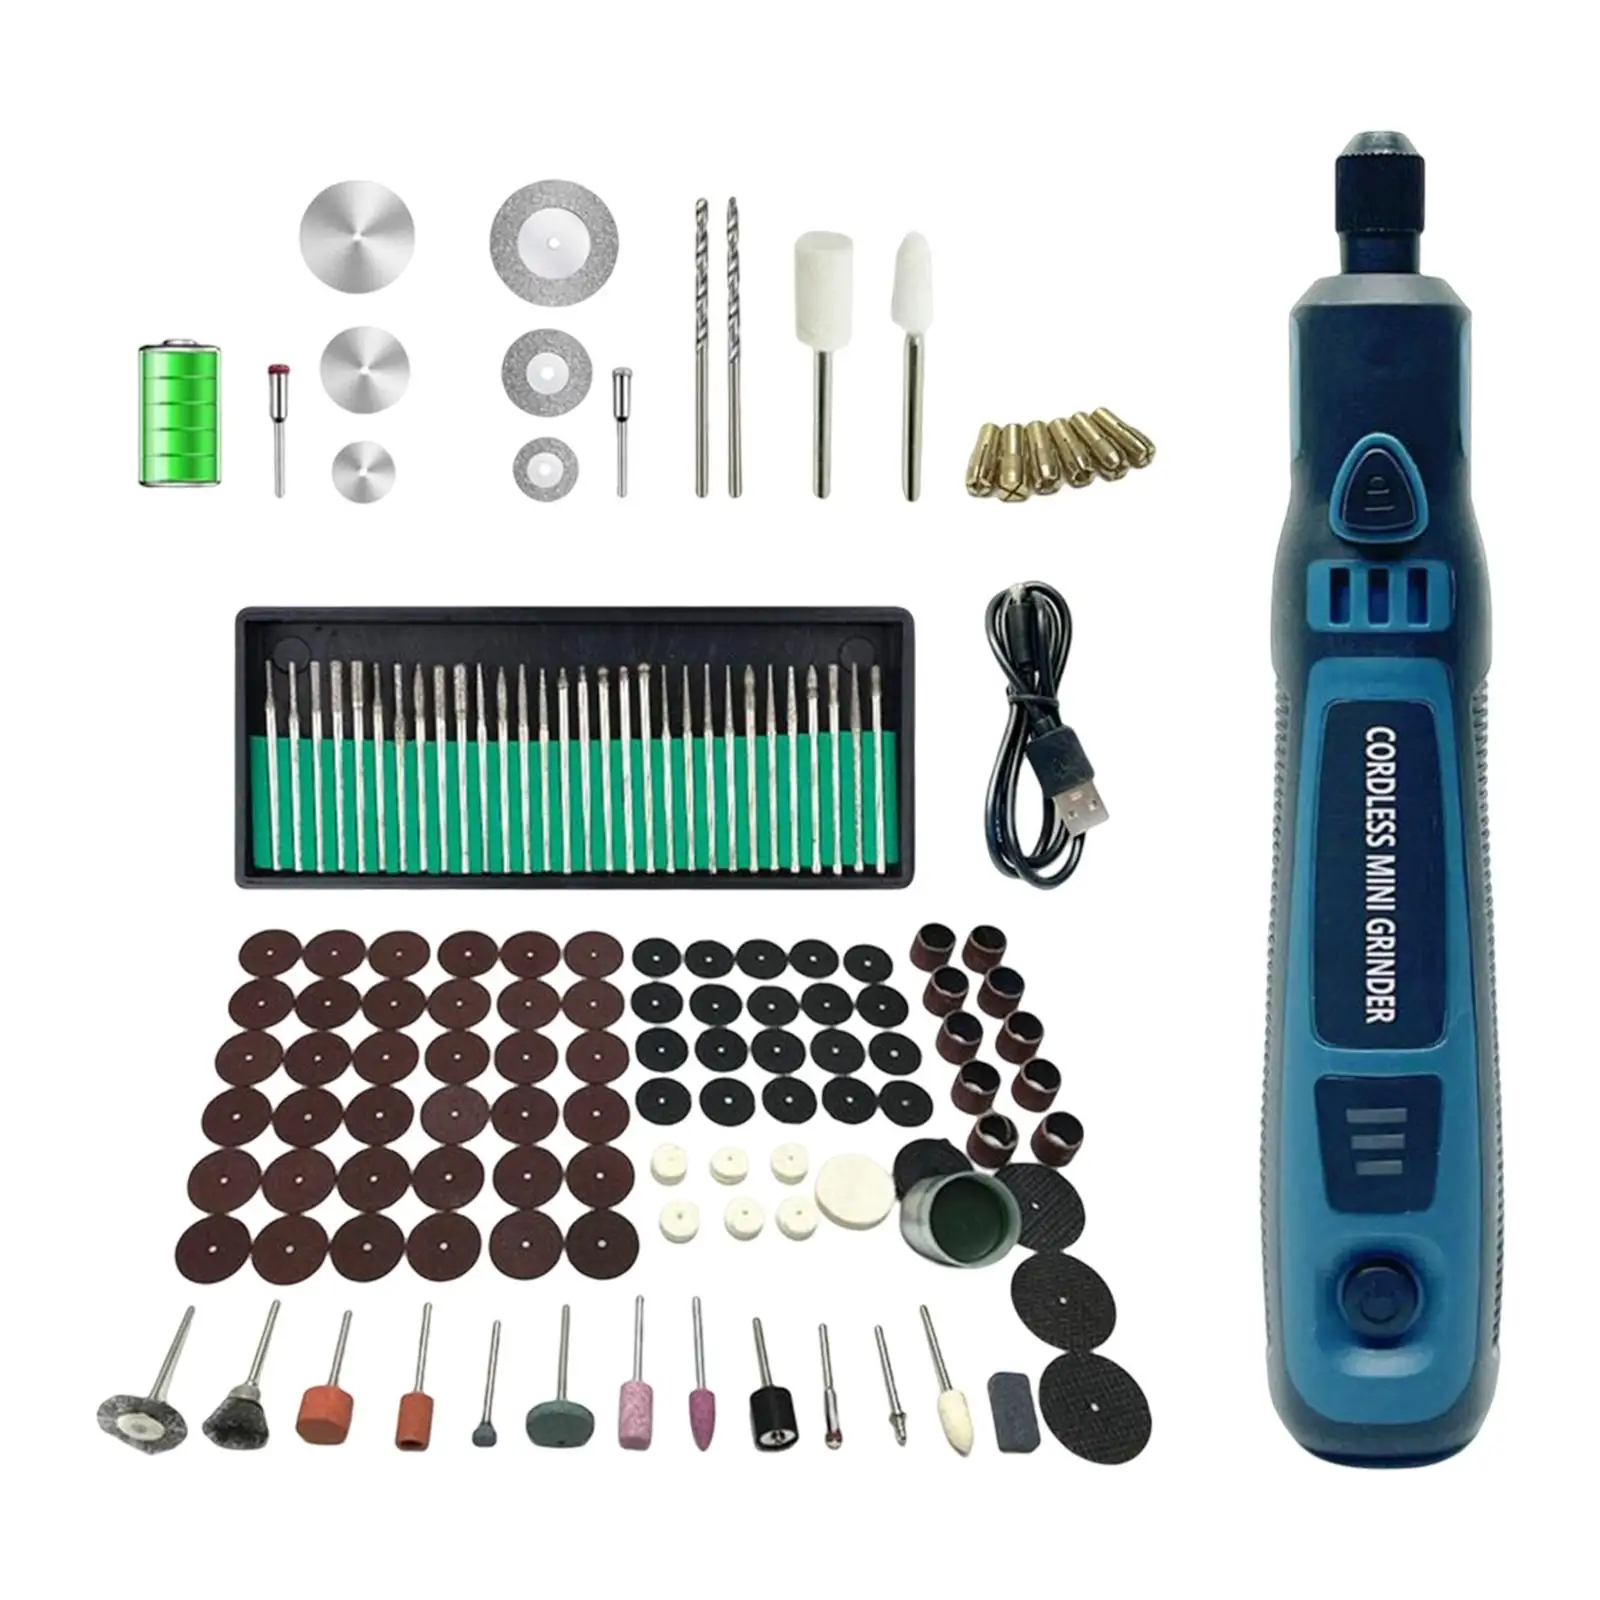 Electric Grinder Kit USB Rechargable with Accessories 3 Speeds for Hobby Craft DIY Crafts Sanding Engraving Drilling